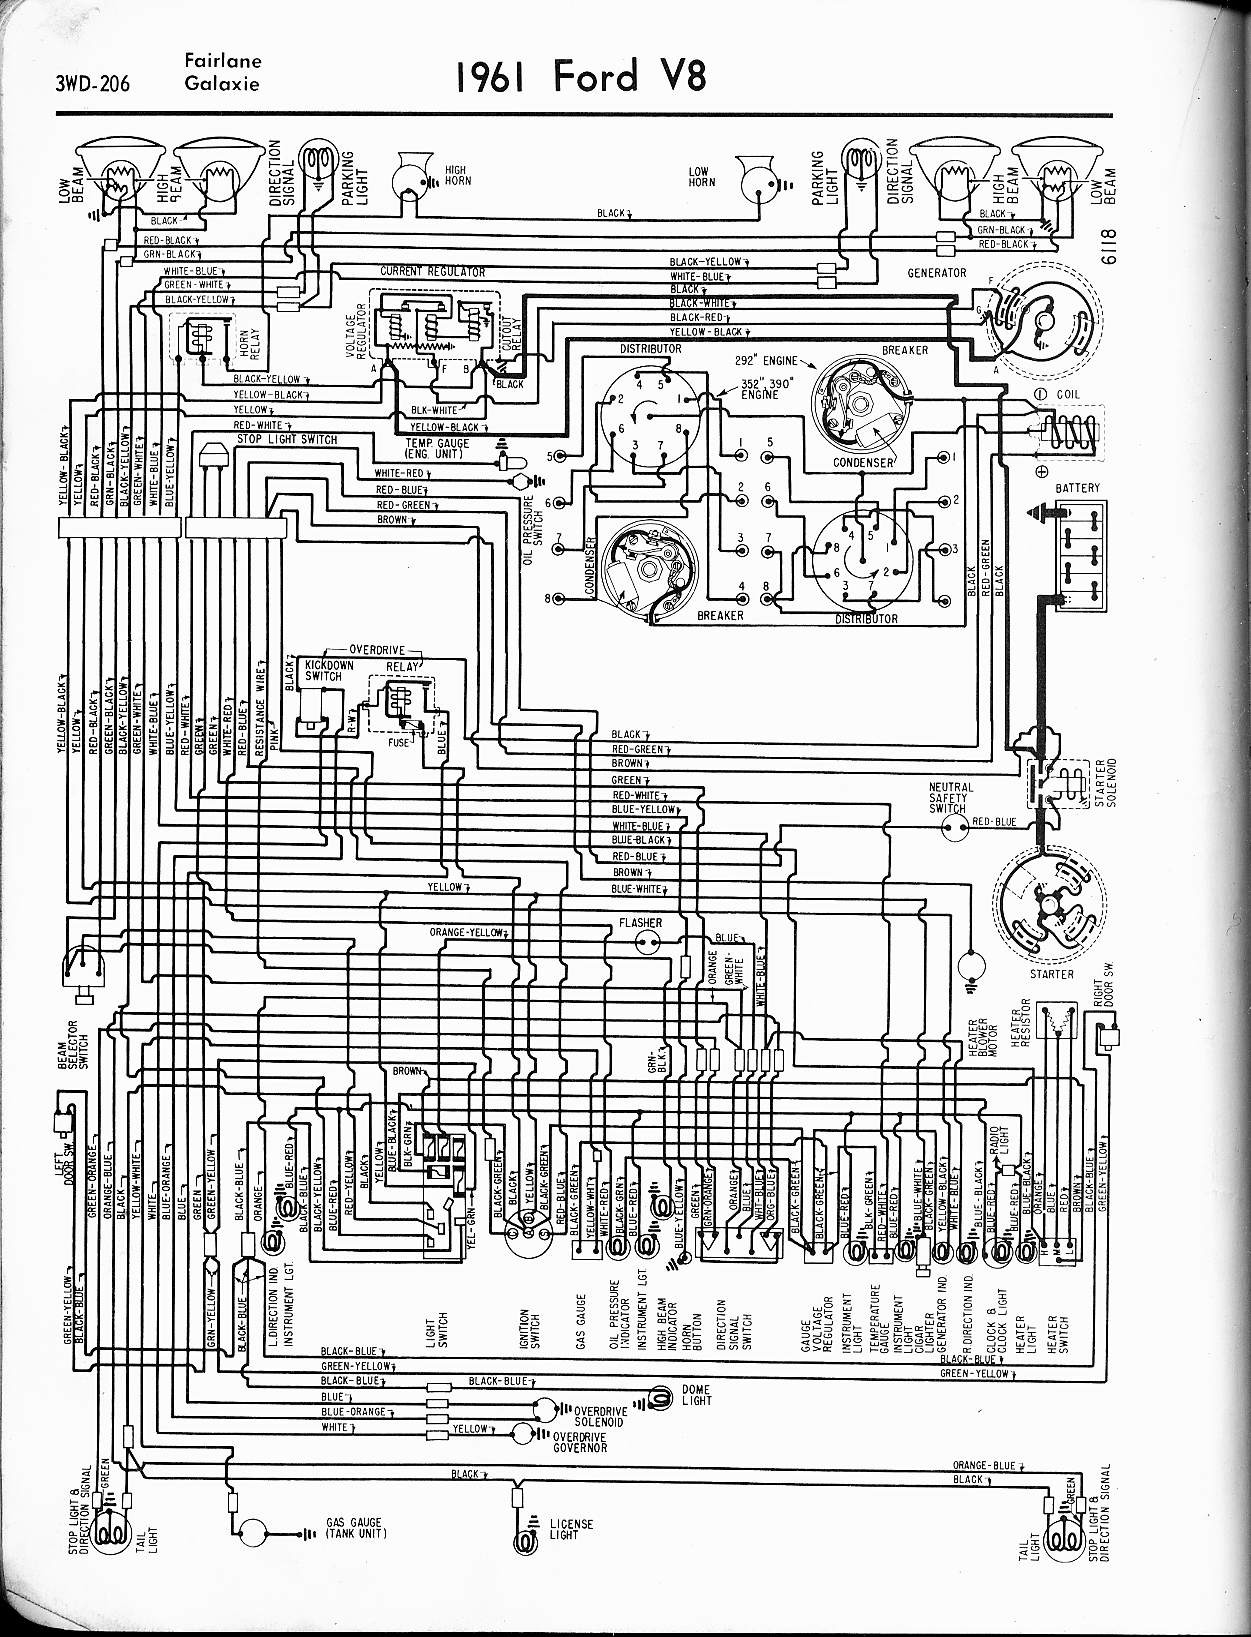 Ford Explorer Parts Diagram 57 65 ford Wiring Diagrams Of Ford Explorer Parts Diagram